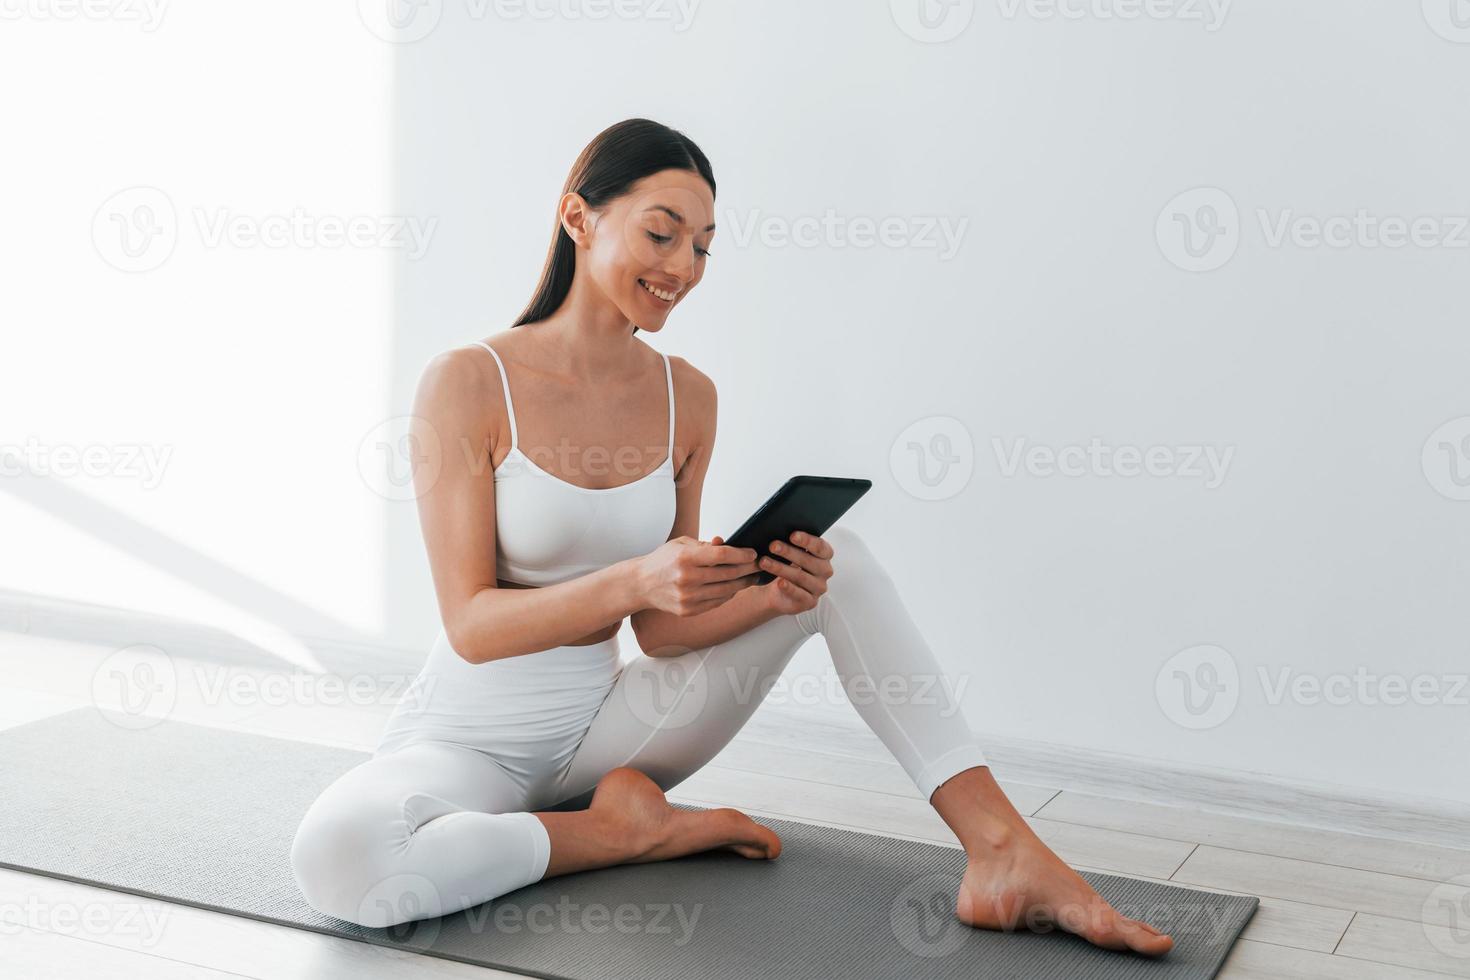 On yoga mat. Young caucasian woman with slim body shape is indoors at  daytime 15363172 Stock Photo at Vecteezy